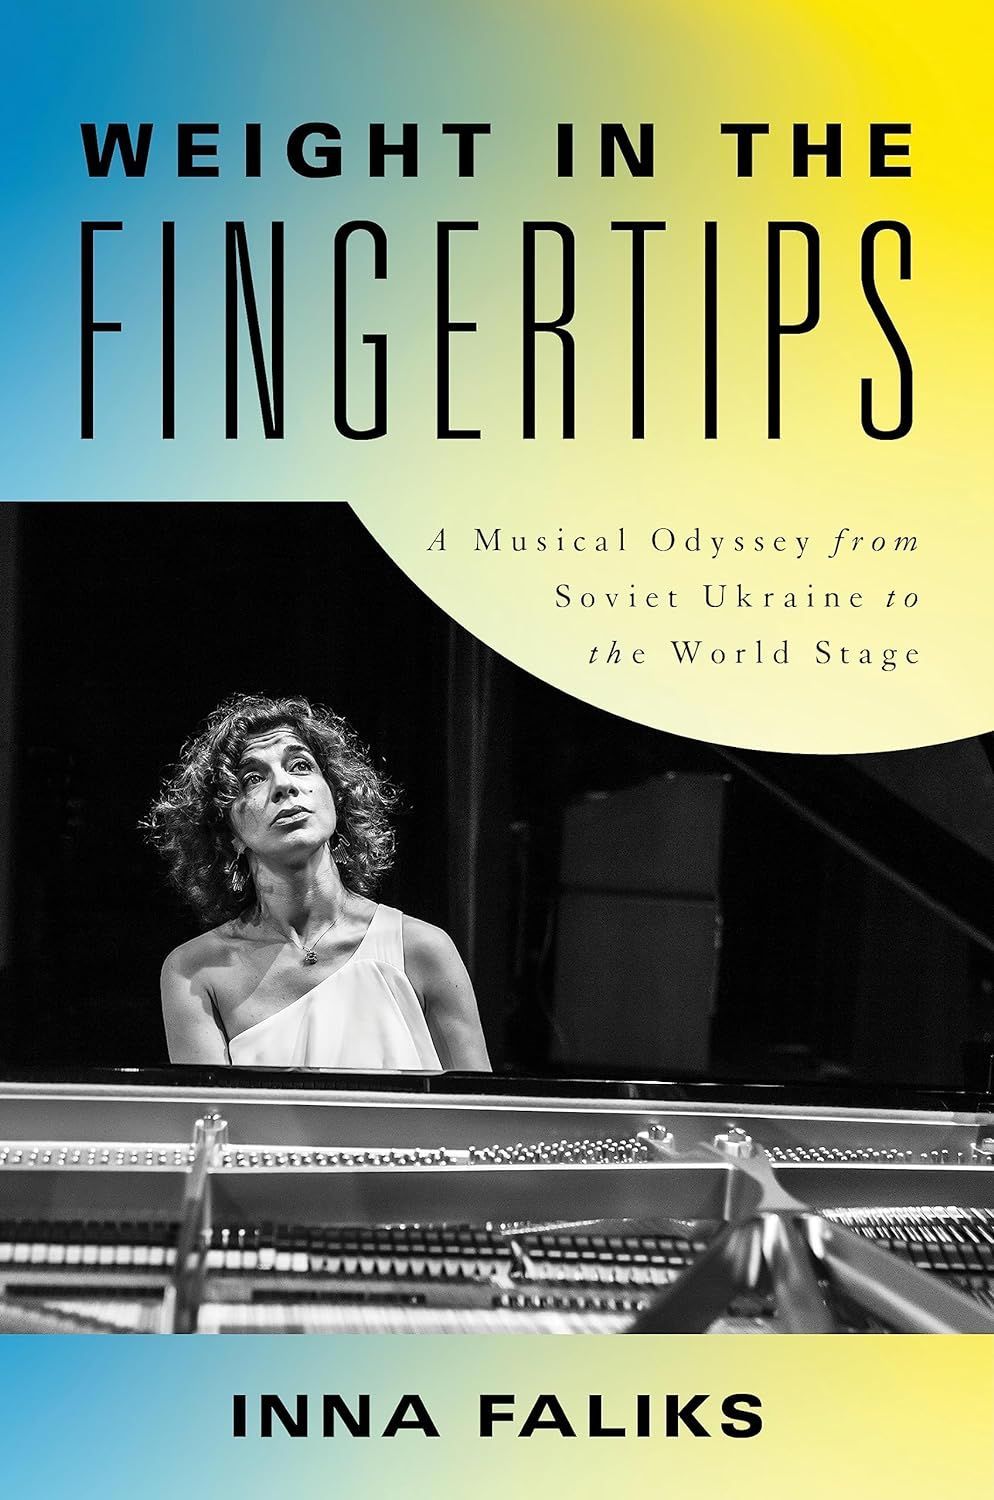 The Journey of a Musical Émigré: On Inna Faliks’s “Weight in the Fingertips”